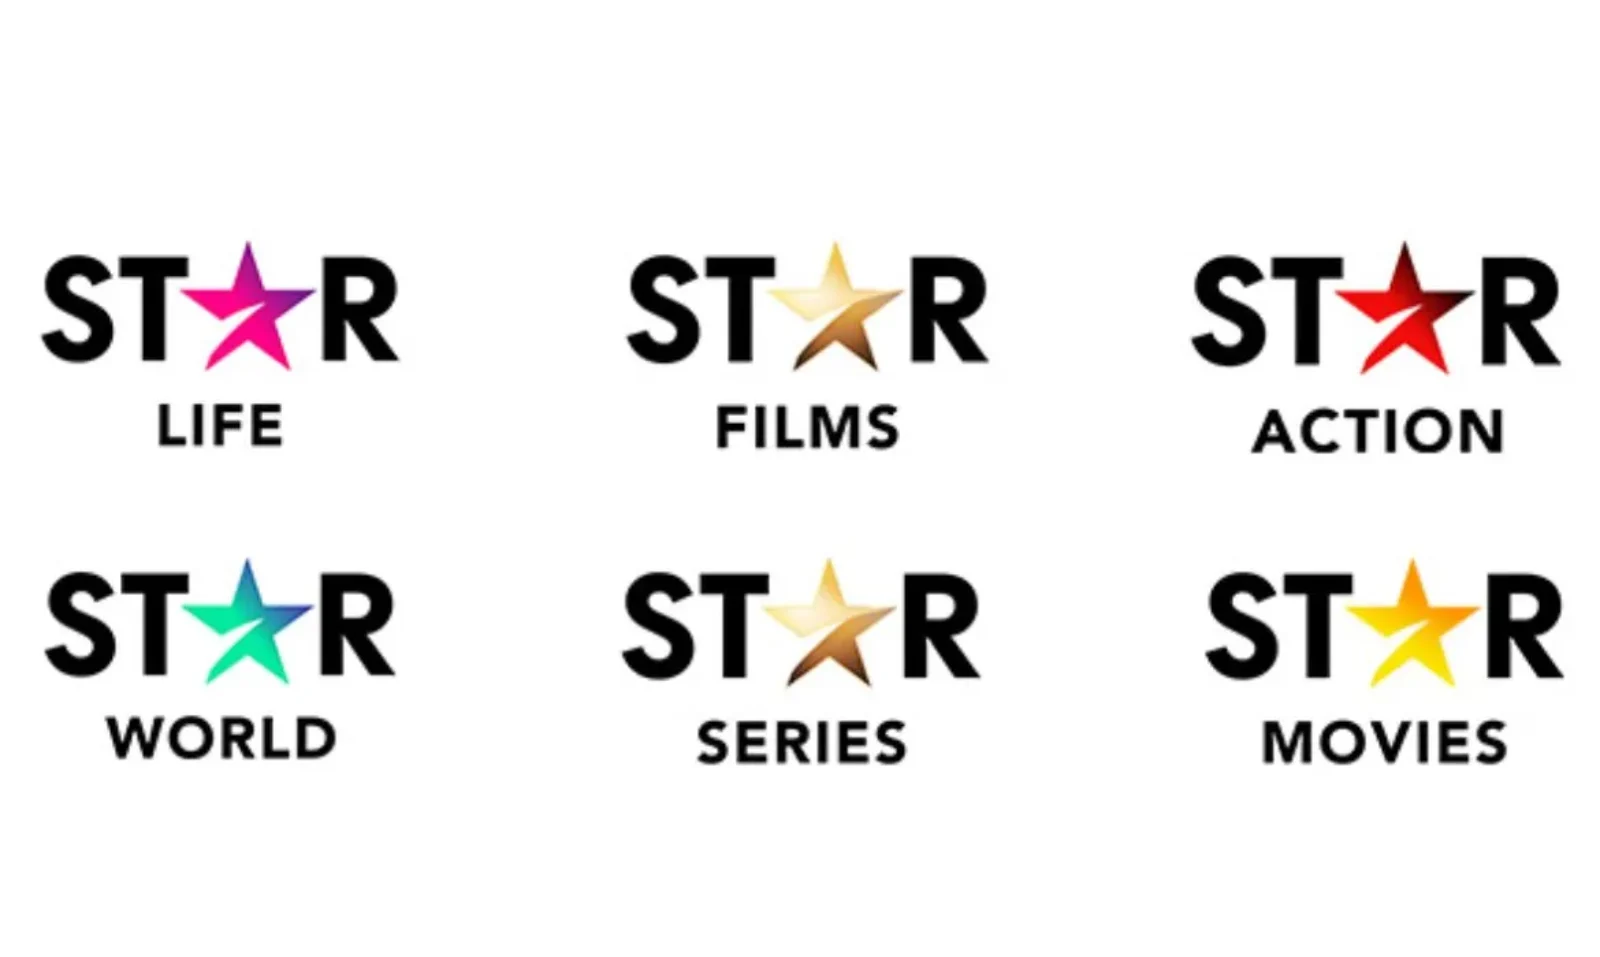 Star World, campaign, Disney channel, channels officially, MENA, Star Action, STAR Channels, STAR Films, STAR Life, STAR Movies, STAR Series, UAE, STAR World, Middle East, international, channels, television, programming,